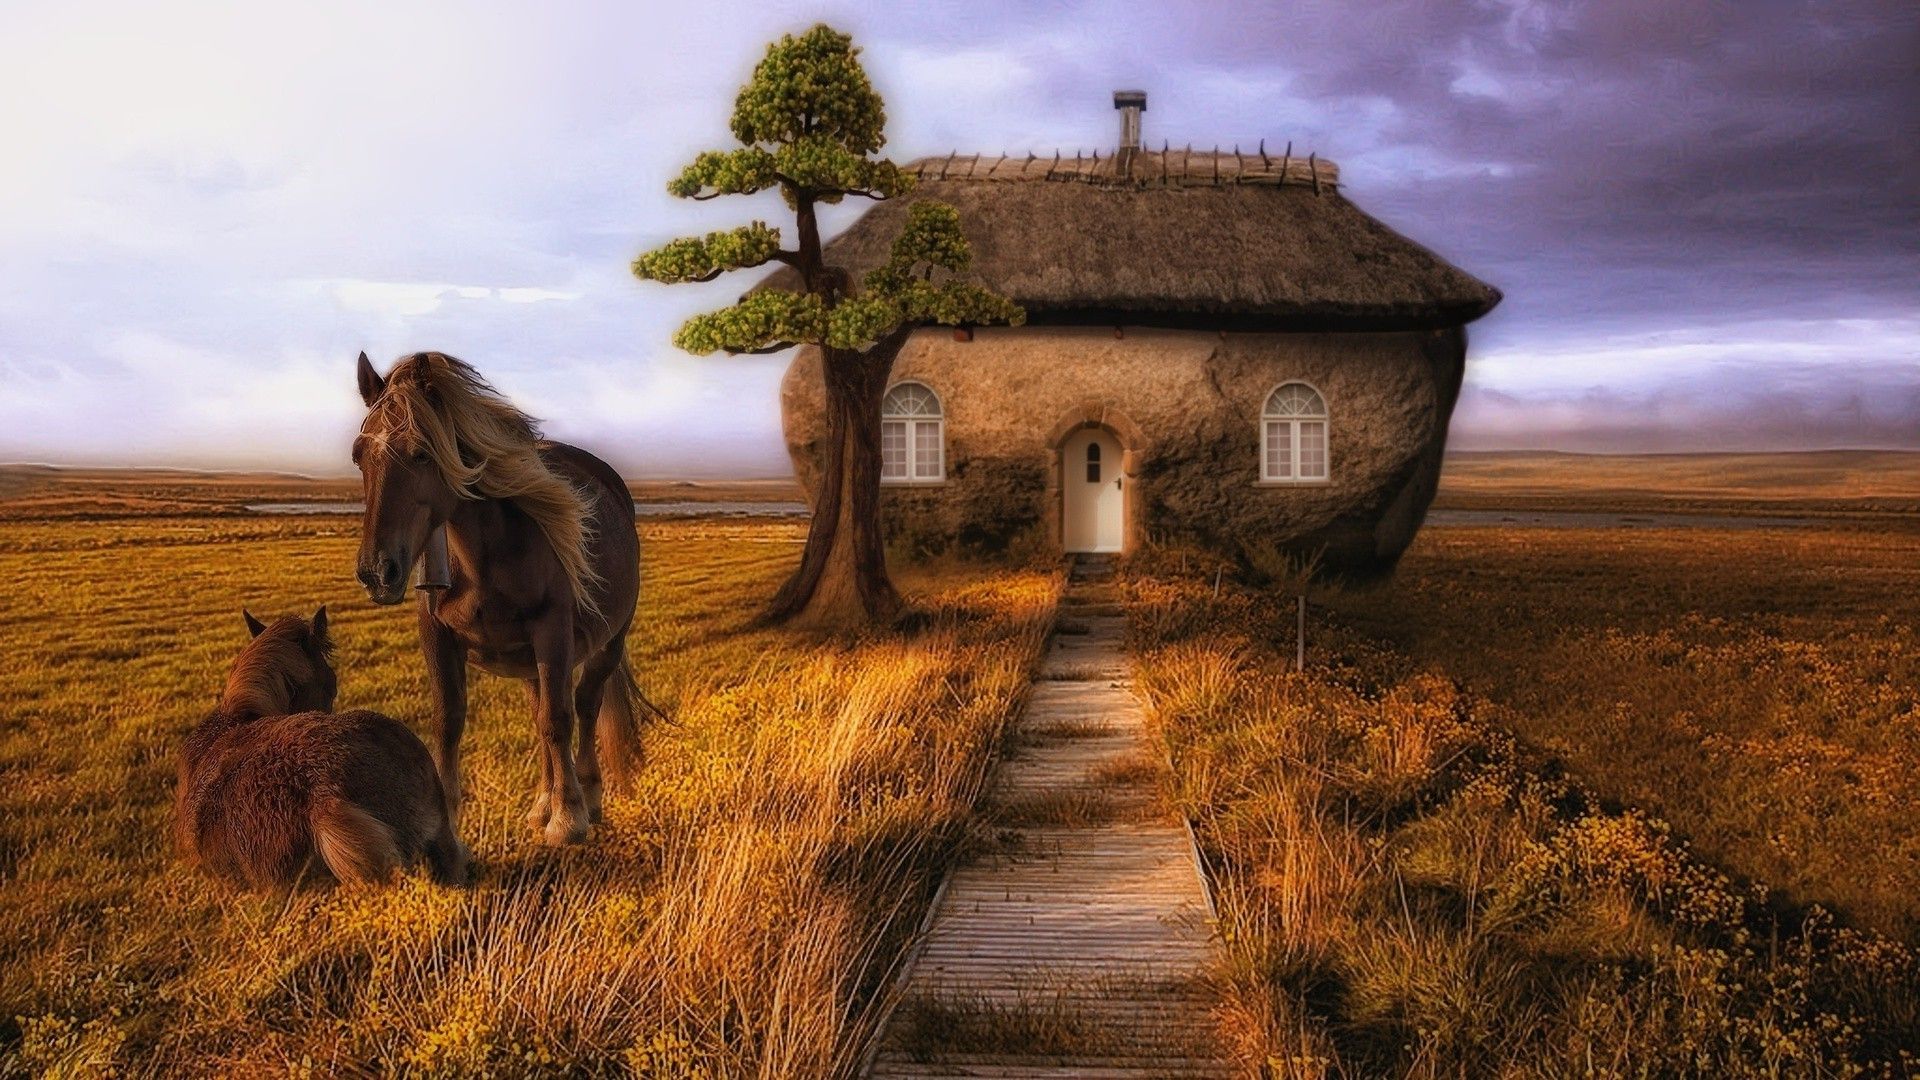 Drawn picture. Horses have a small house